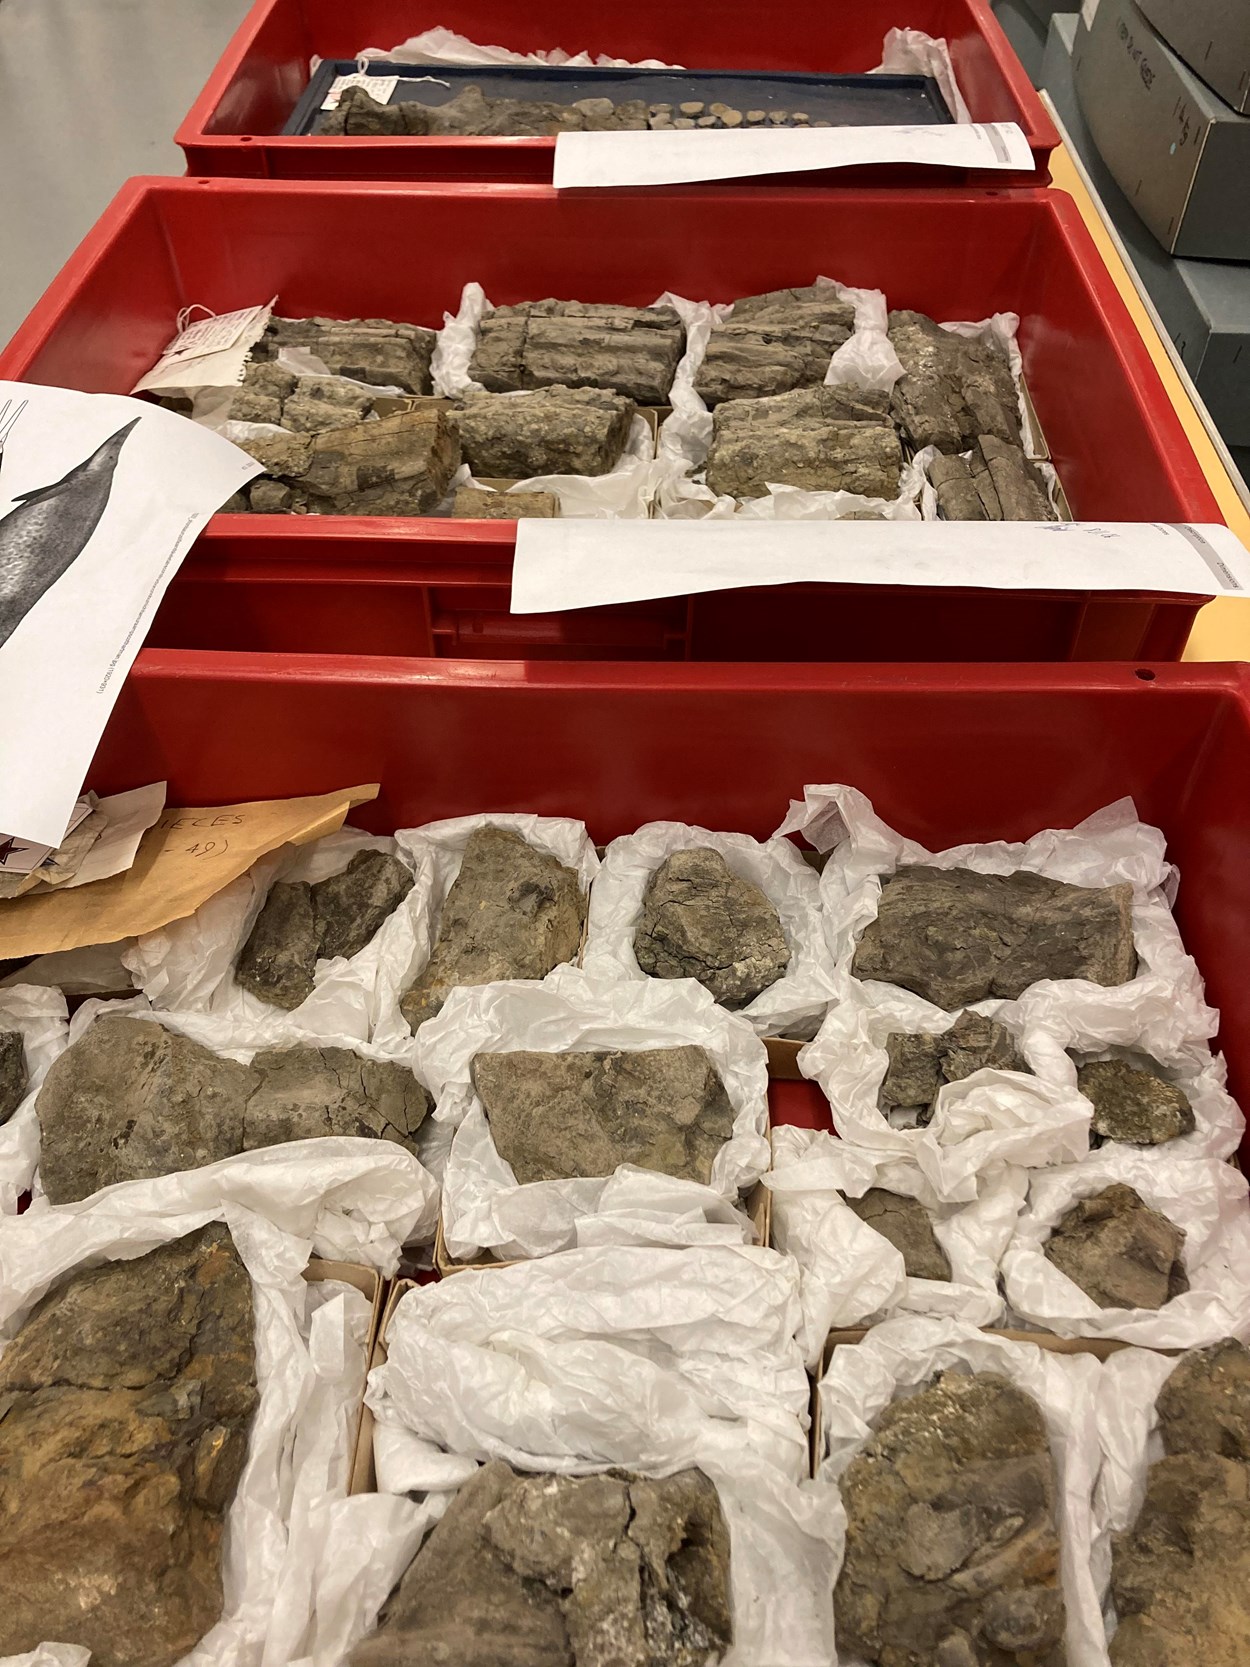 Fossil find: The impressive fossilised remains of an Ichthyosaur, found by Pauline Hoggard on a beach in Whitby in 1949 and now stored at the Leeds Discovery Centre.